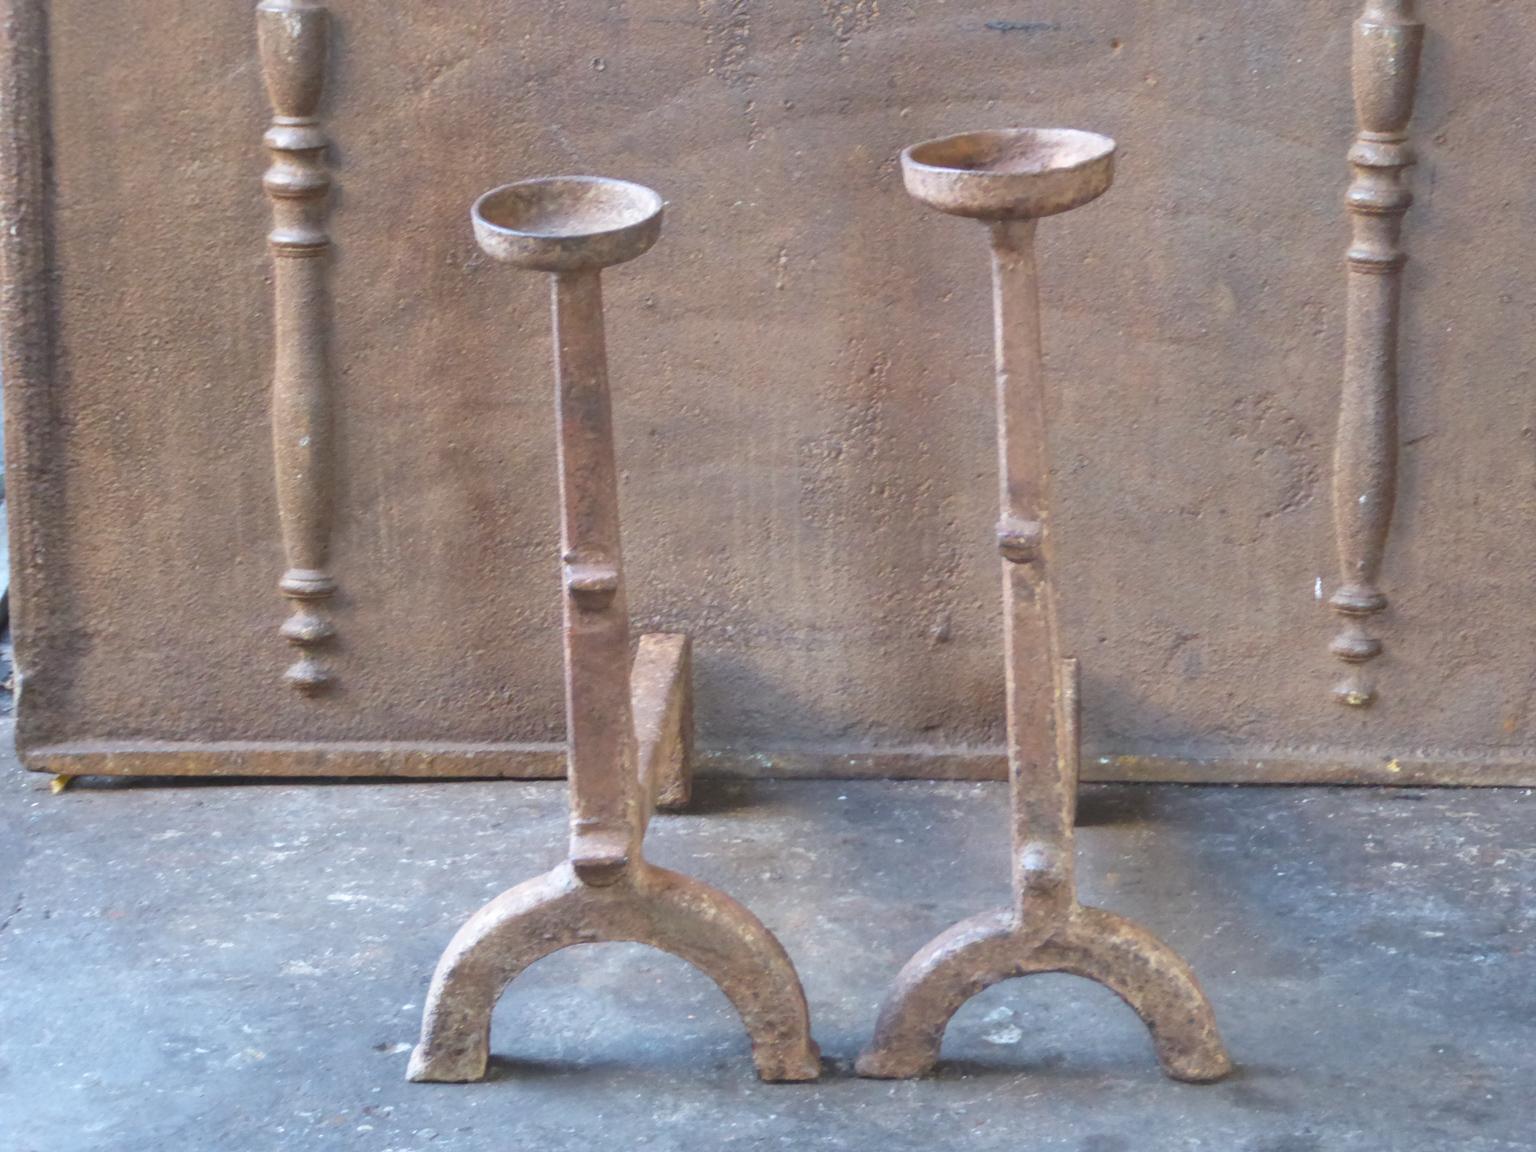 17th-18th century French andirons made of cast iron. The style of the andirons is Gothic. The andirons have spit hooks to grill food and a cup to keep drinks warm. They are in a good condition.